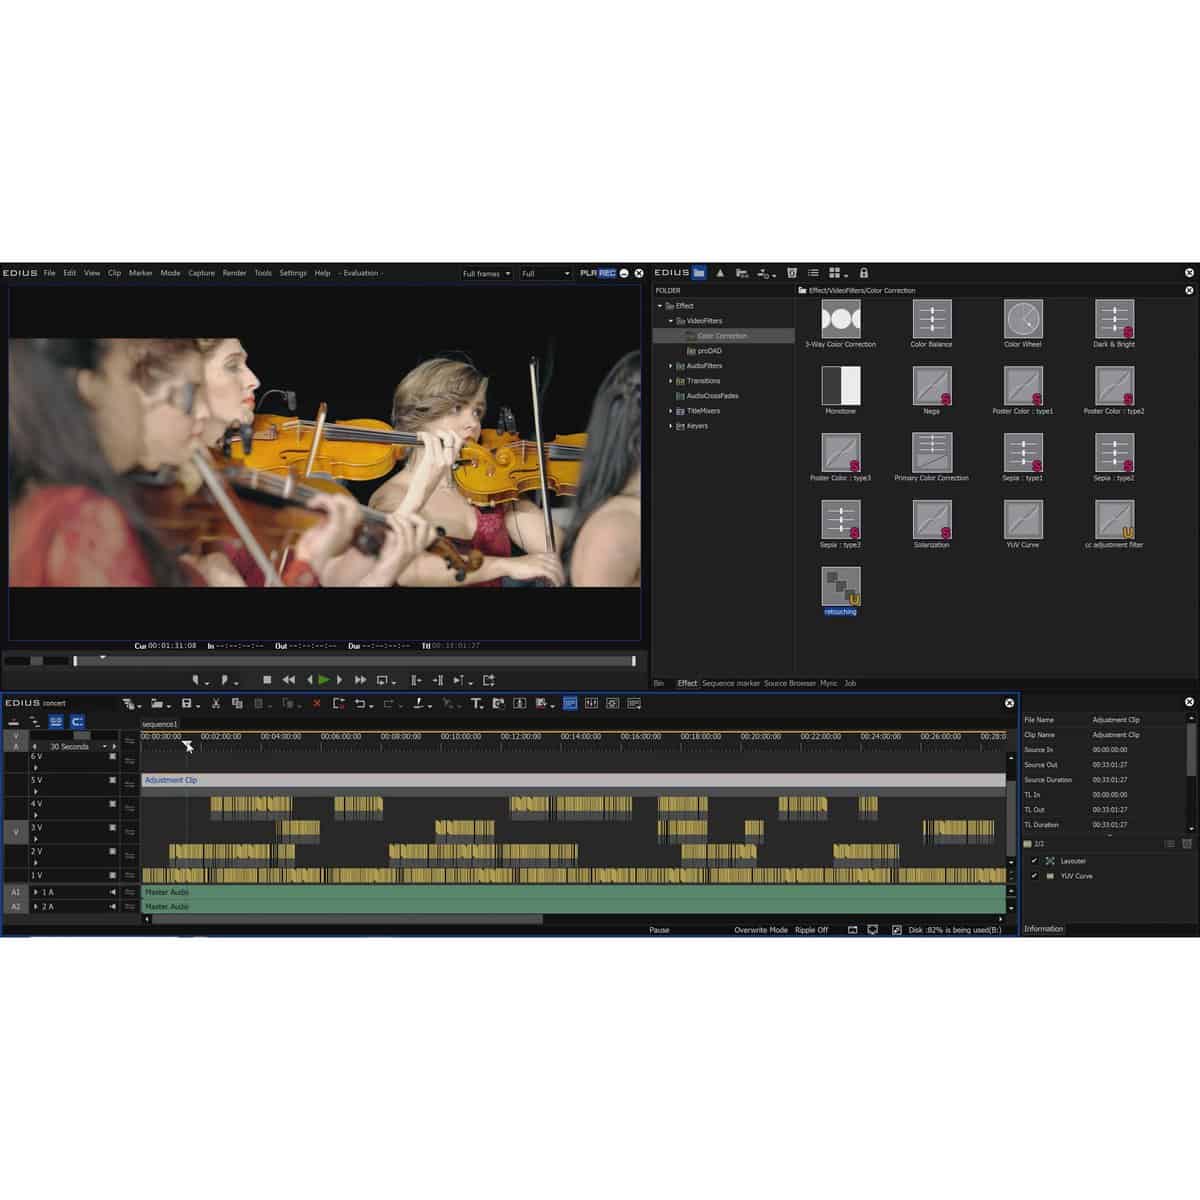 EDIUS 11 Workgroup Video Editing Software Upgrade from EDIUS X Workgroup, Download Only